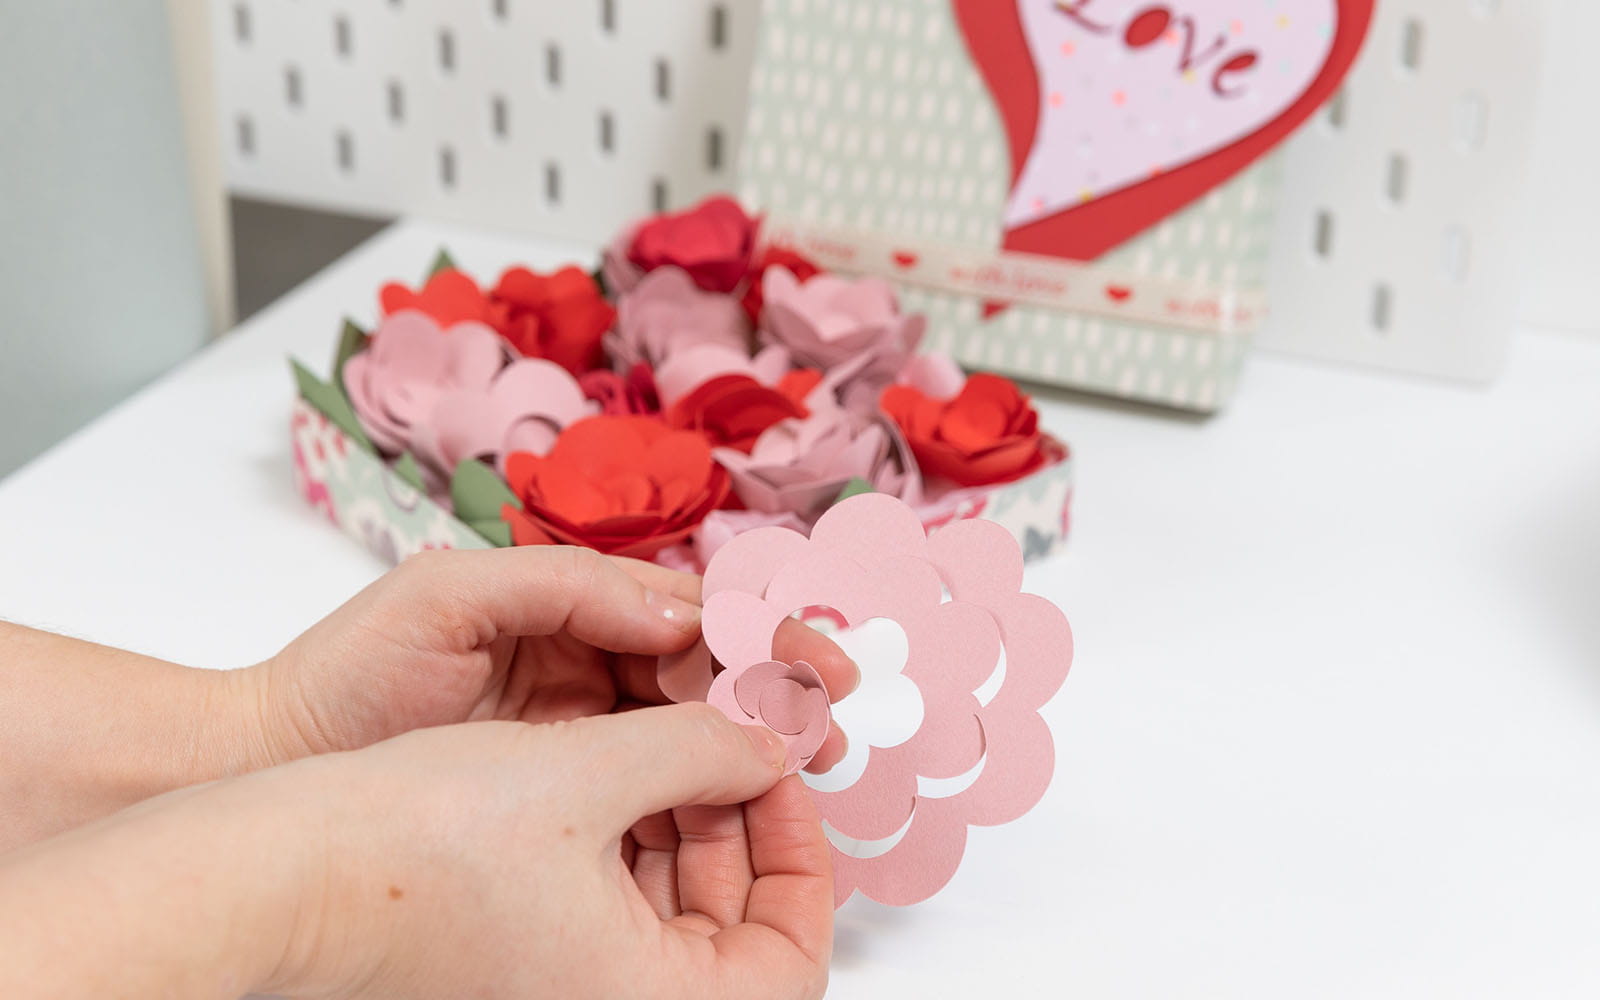 Hands holding pink papercraft spiral and turning into rose